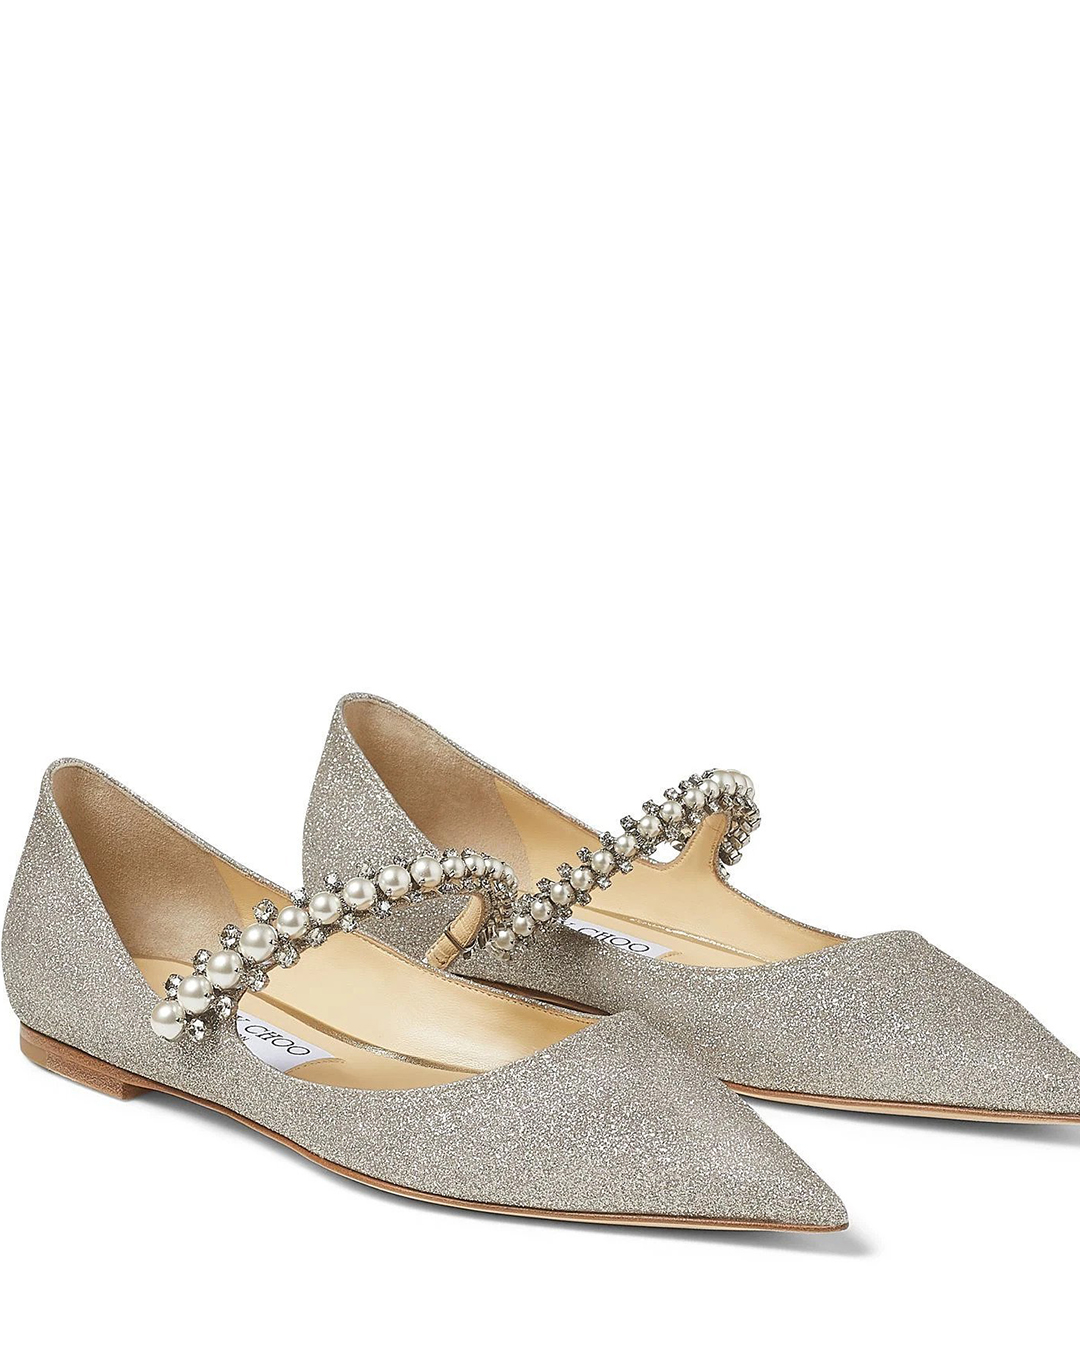 sparkly wedding shoes flats comfortable with pearls jimmy choo